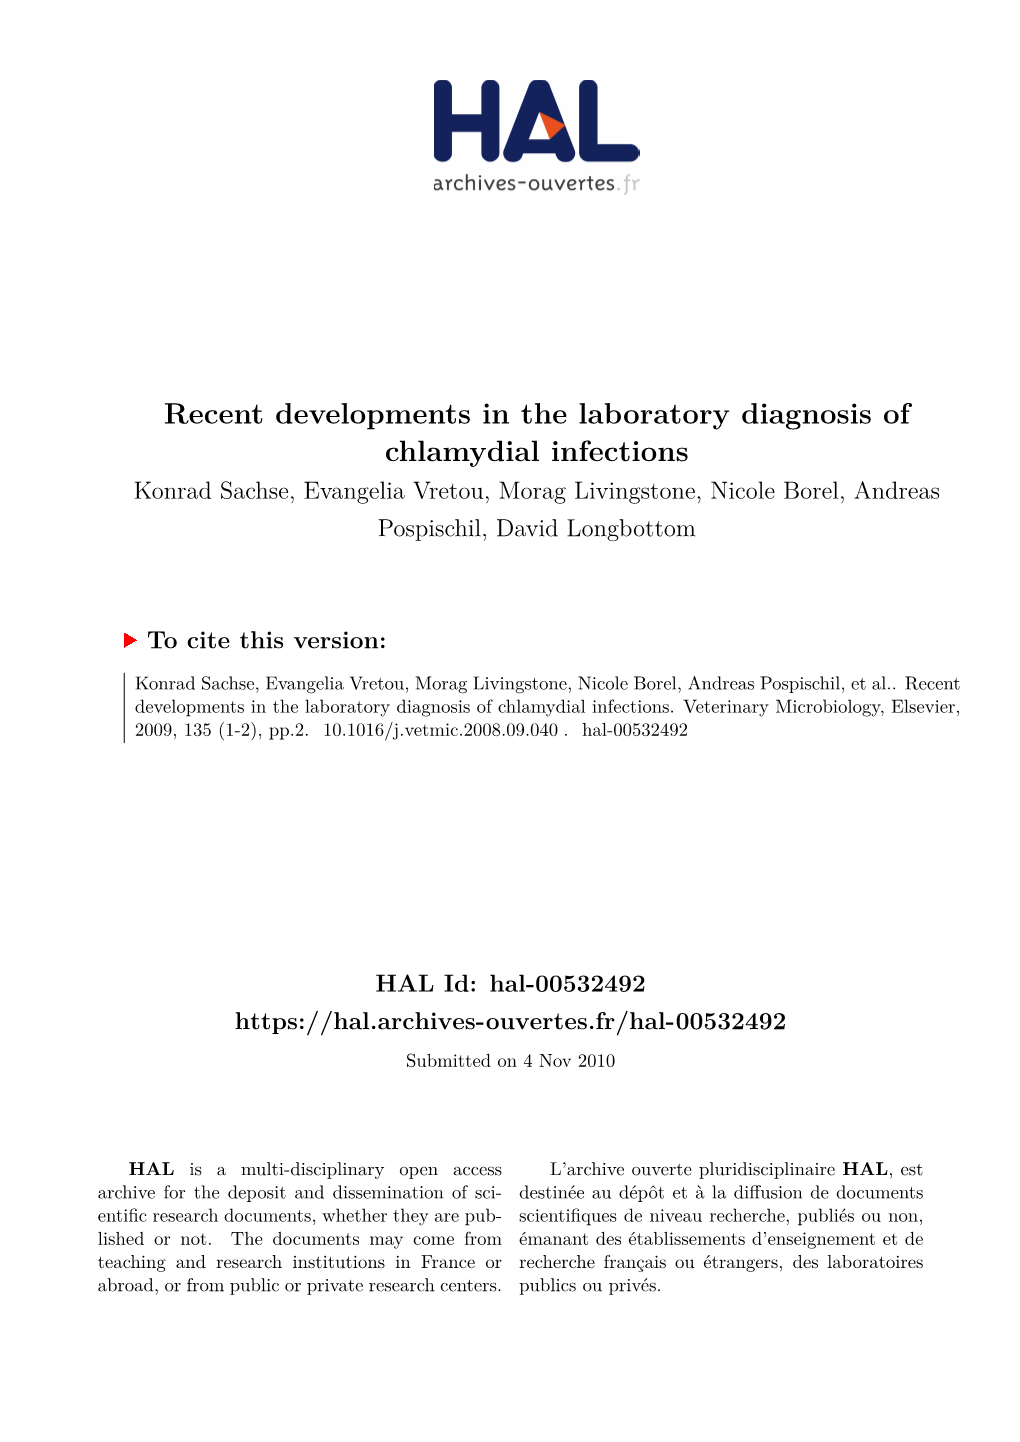 Recent Developments in the Laboratory Diagnosis of Chlamydial Infections